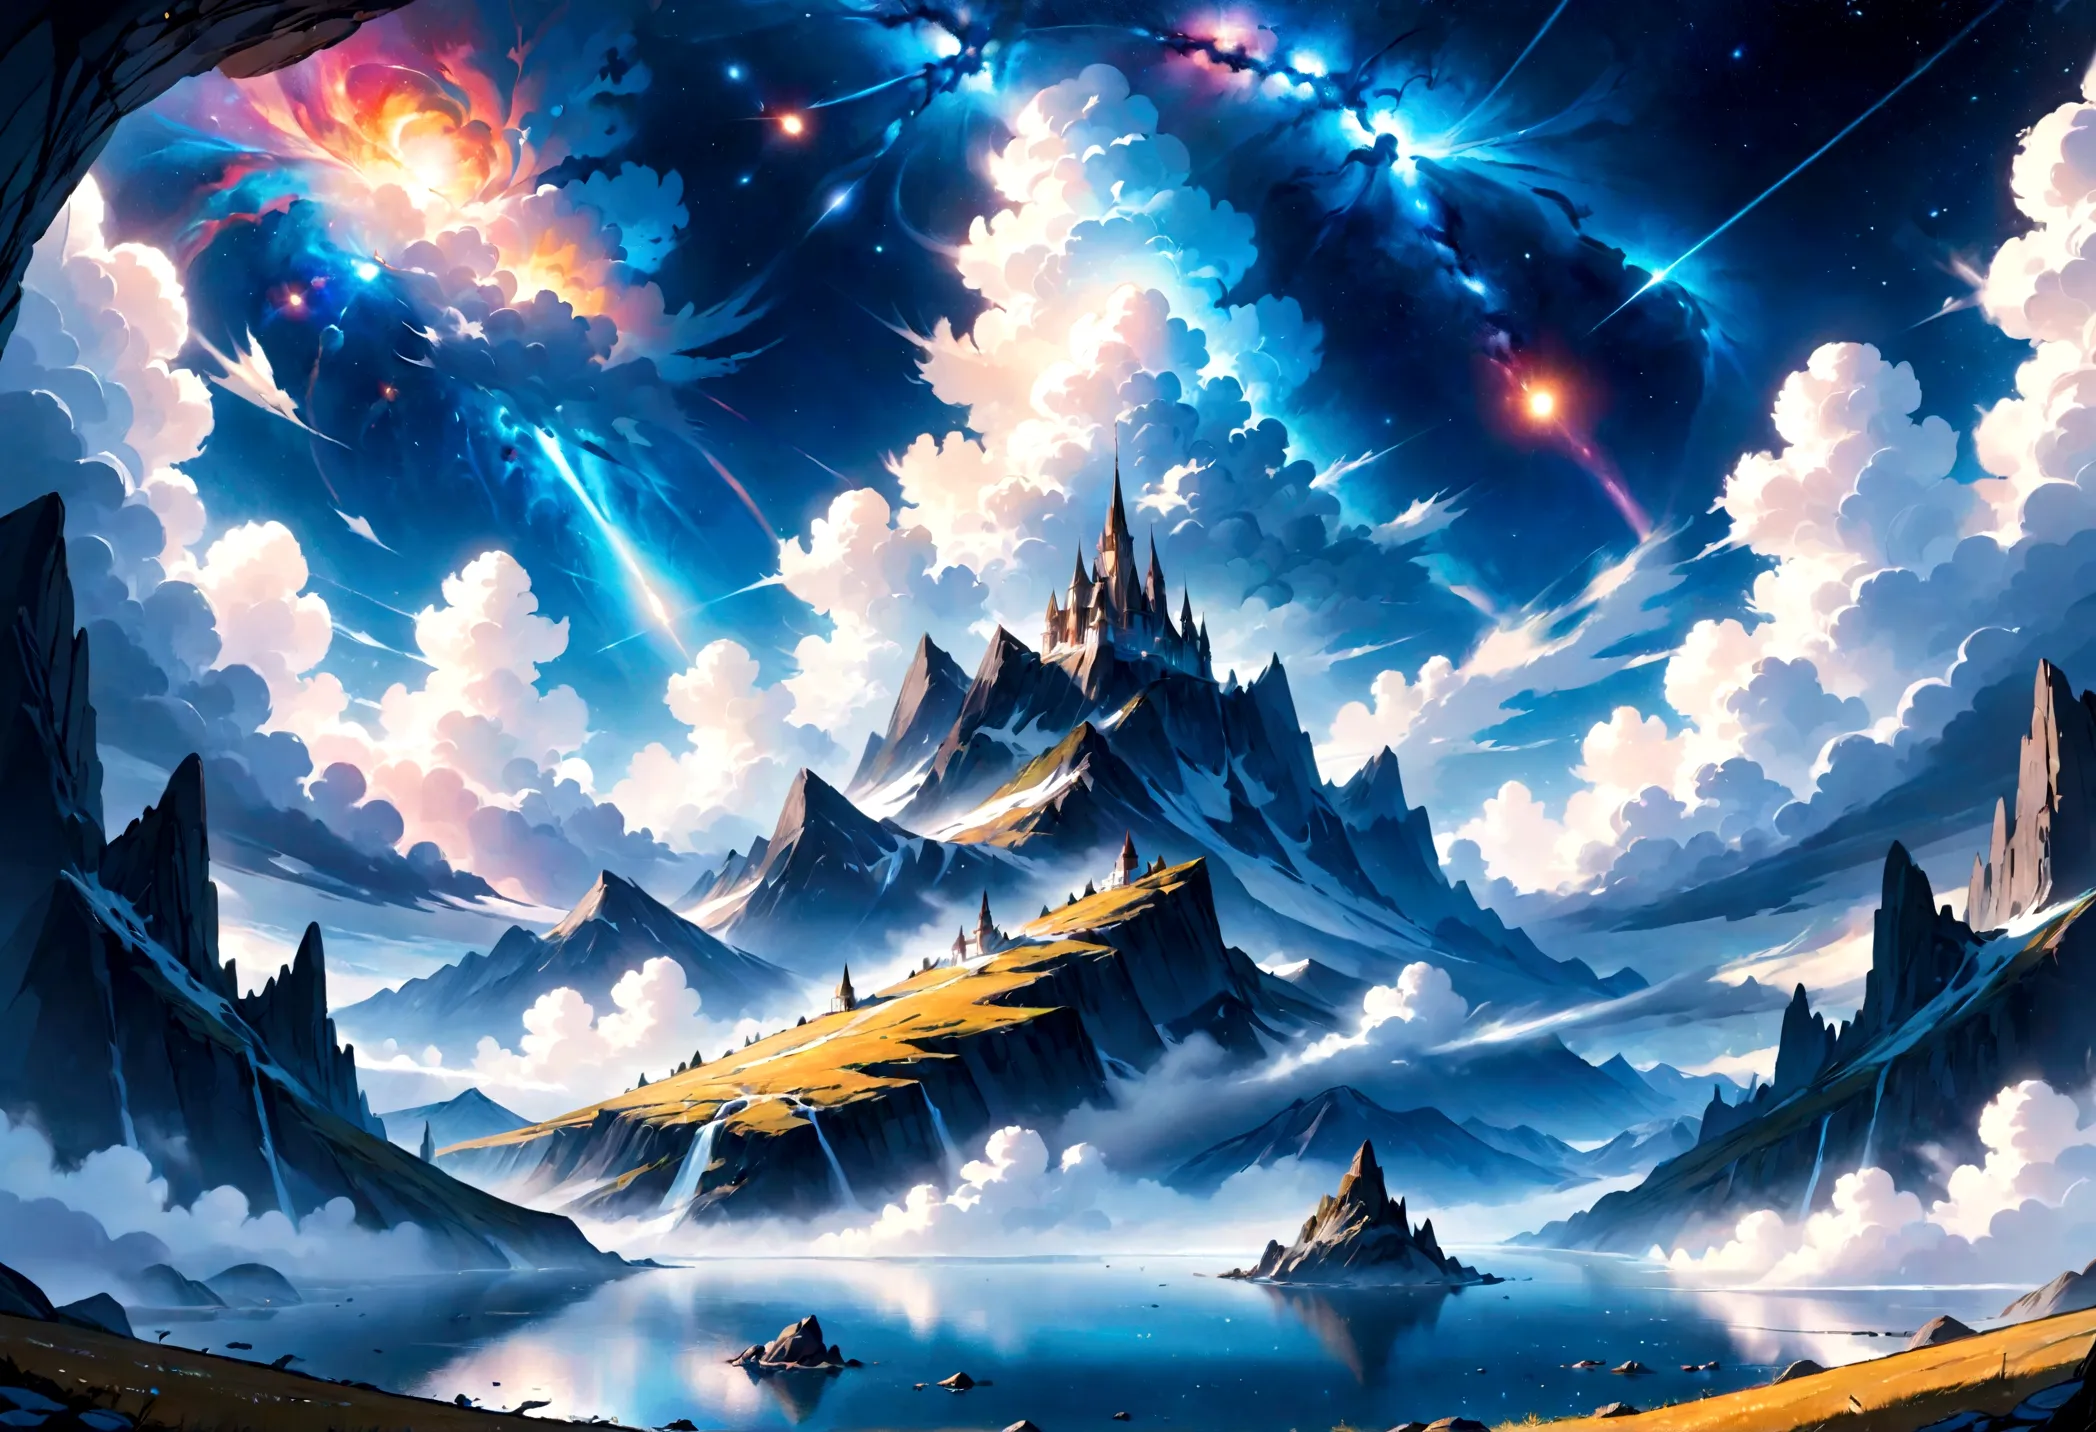 a white and blue based dream landscape within a cloud galaxy